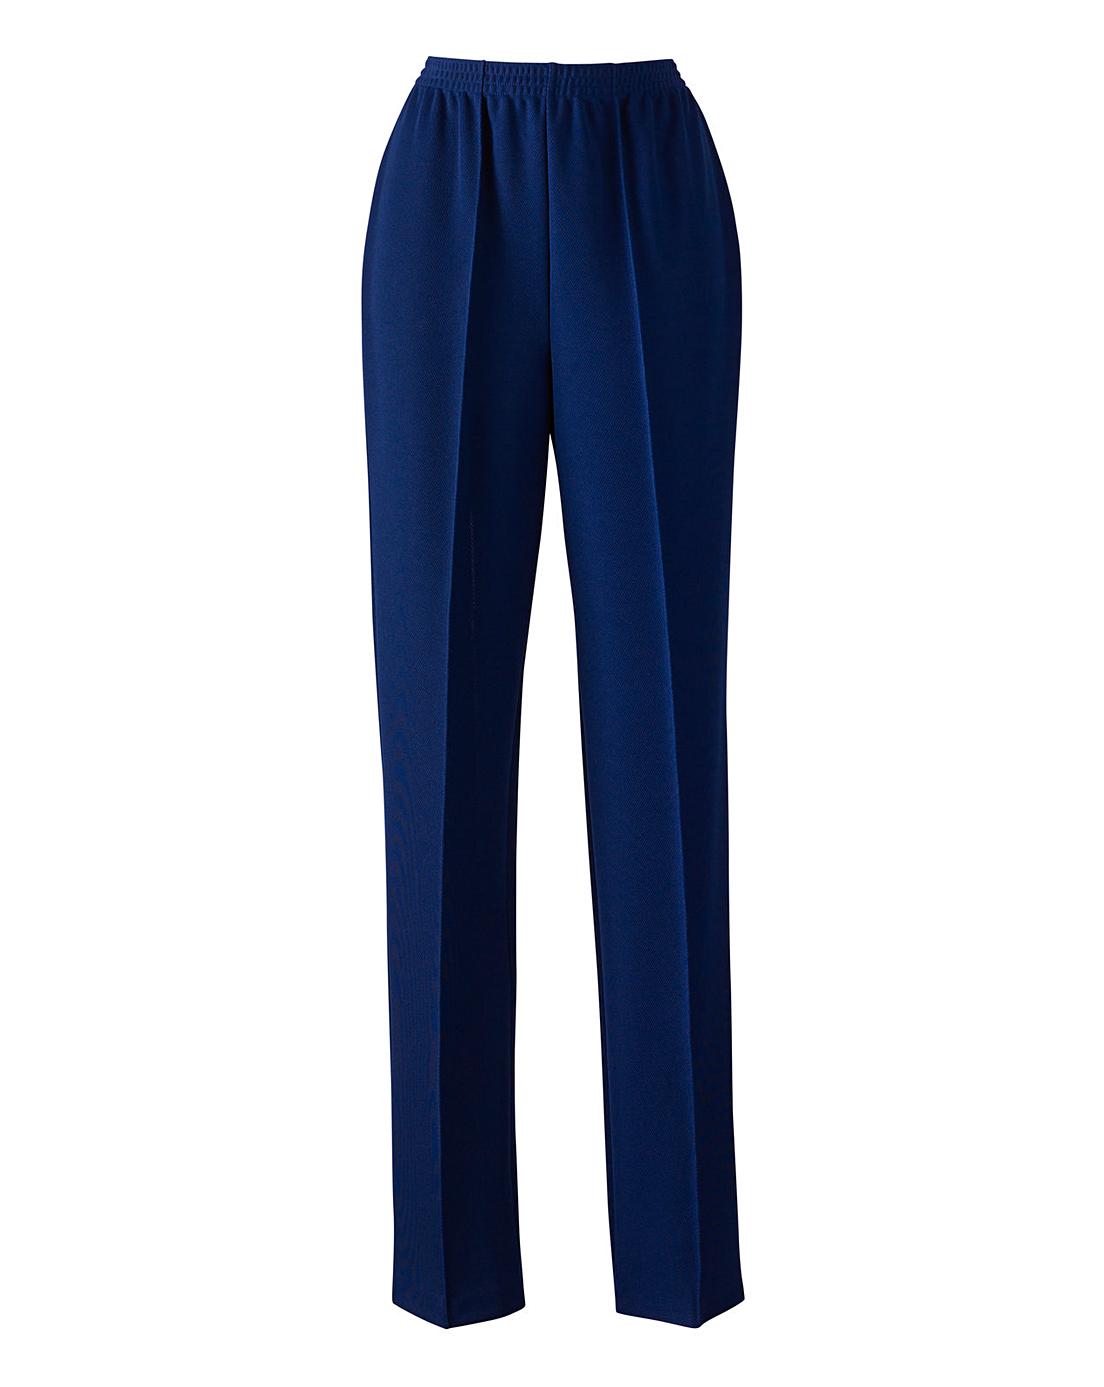 Slimma Pull-On Trousers Length 25in | J D Williams